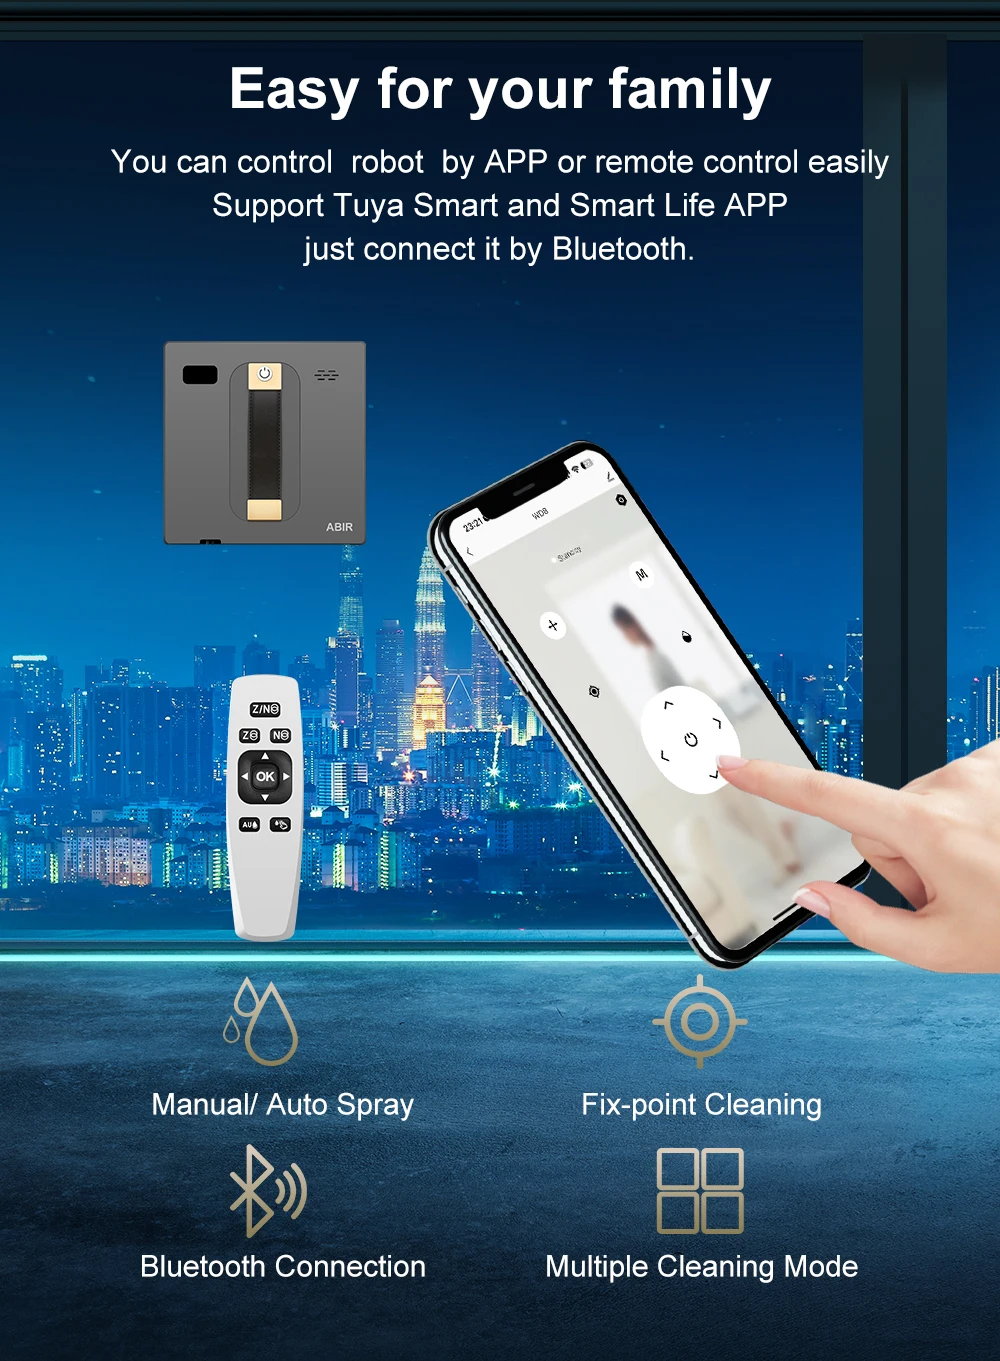 Easy for your family: You can control robot by APP or remote control easily Support Tuya Smart and Smart Life APP just connect it by Bluetooth. Manual/ Auto Spray, Fix-point Cleaning, Bluetooth Connection, Multiple Cleaning Mode.